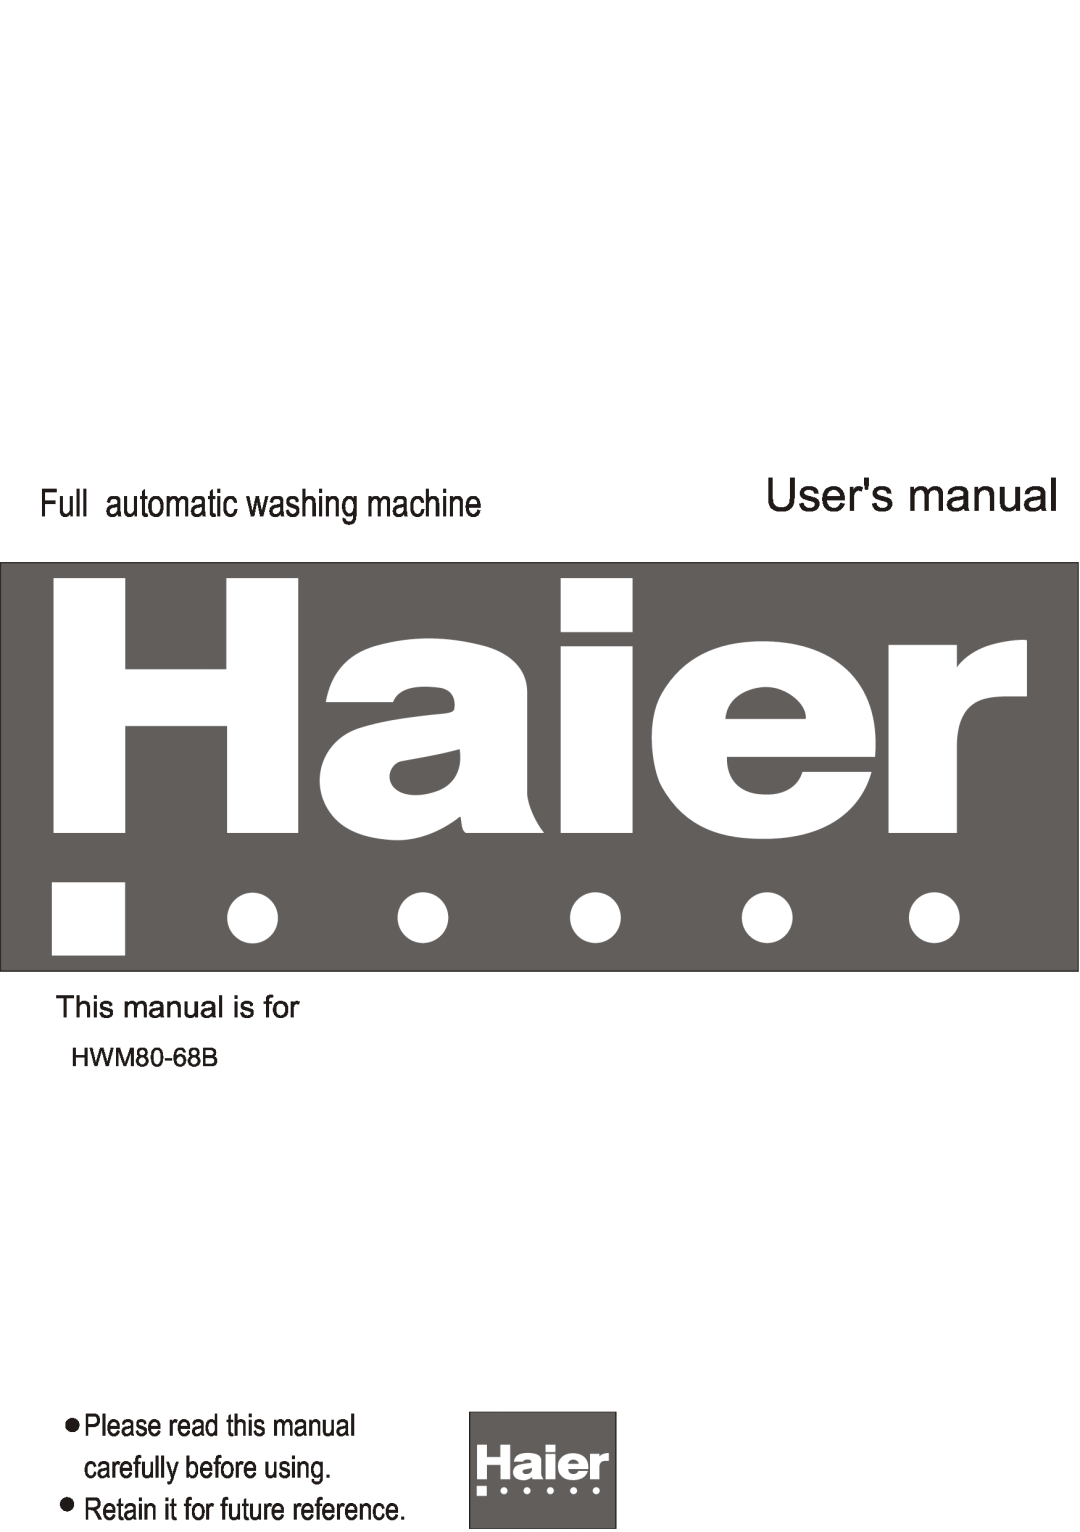 Haier HWM80-68B user manual Users manual, Full automatic washing machine, This manual is for 